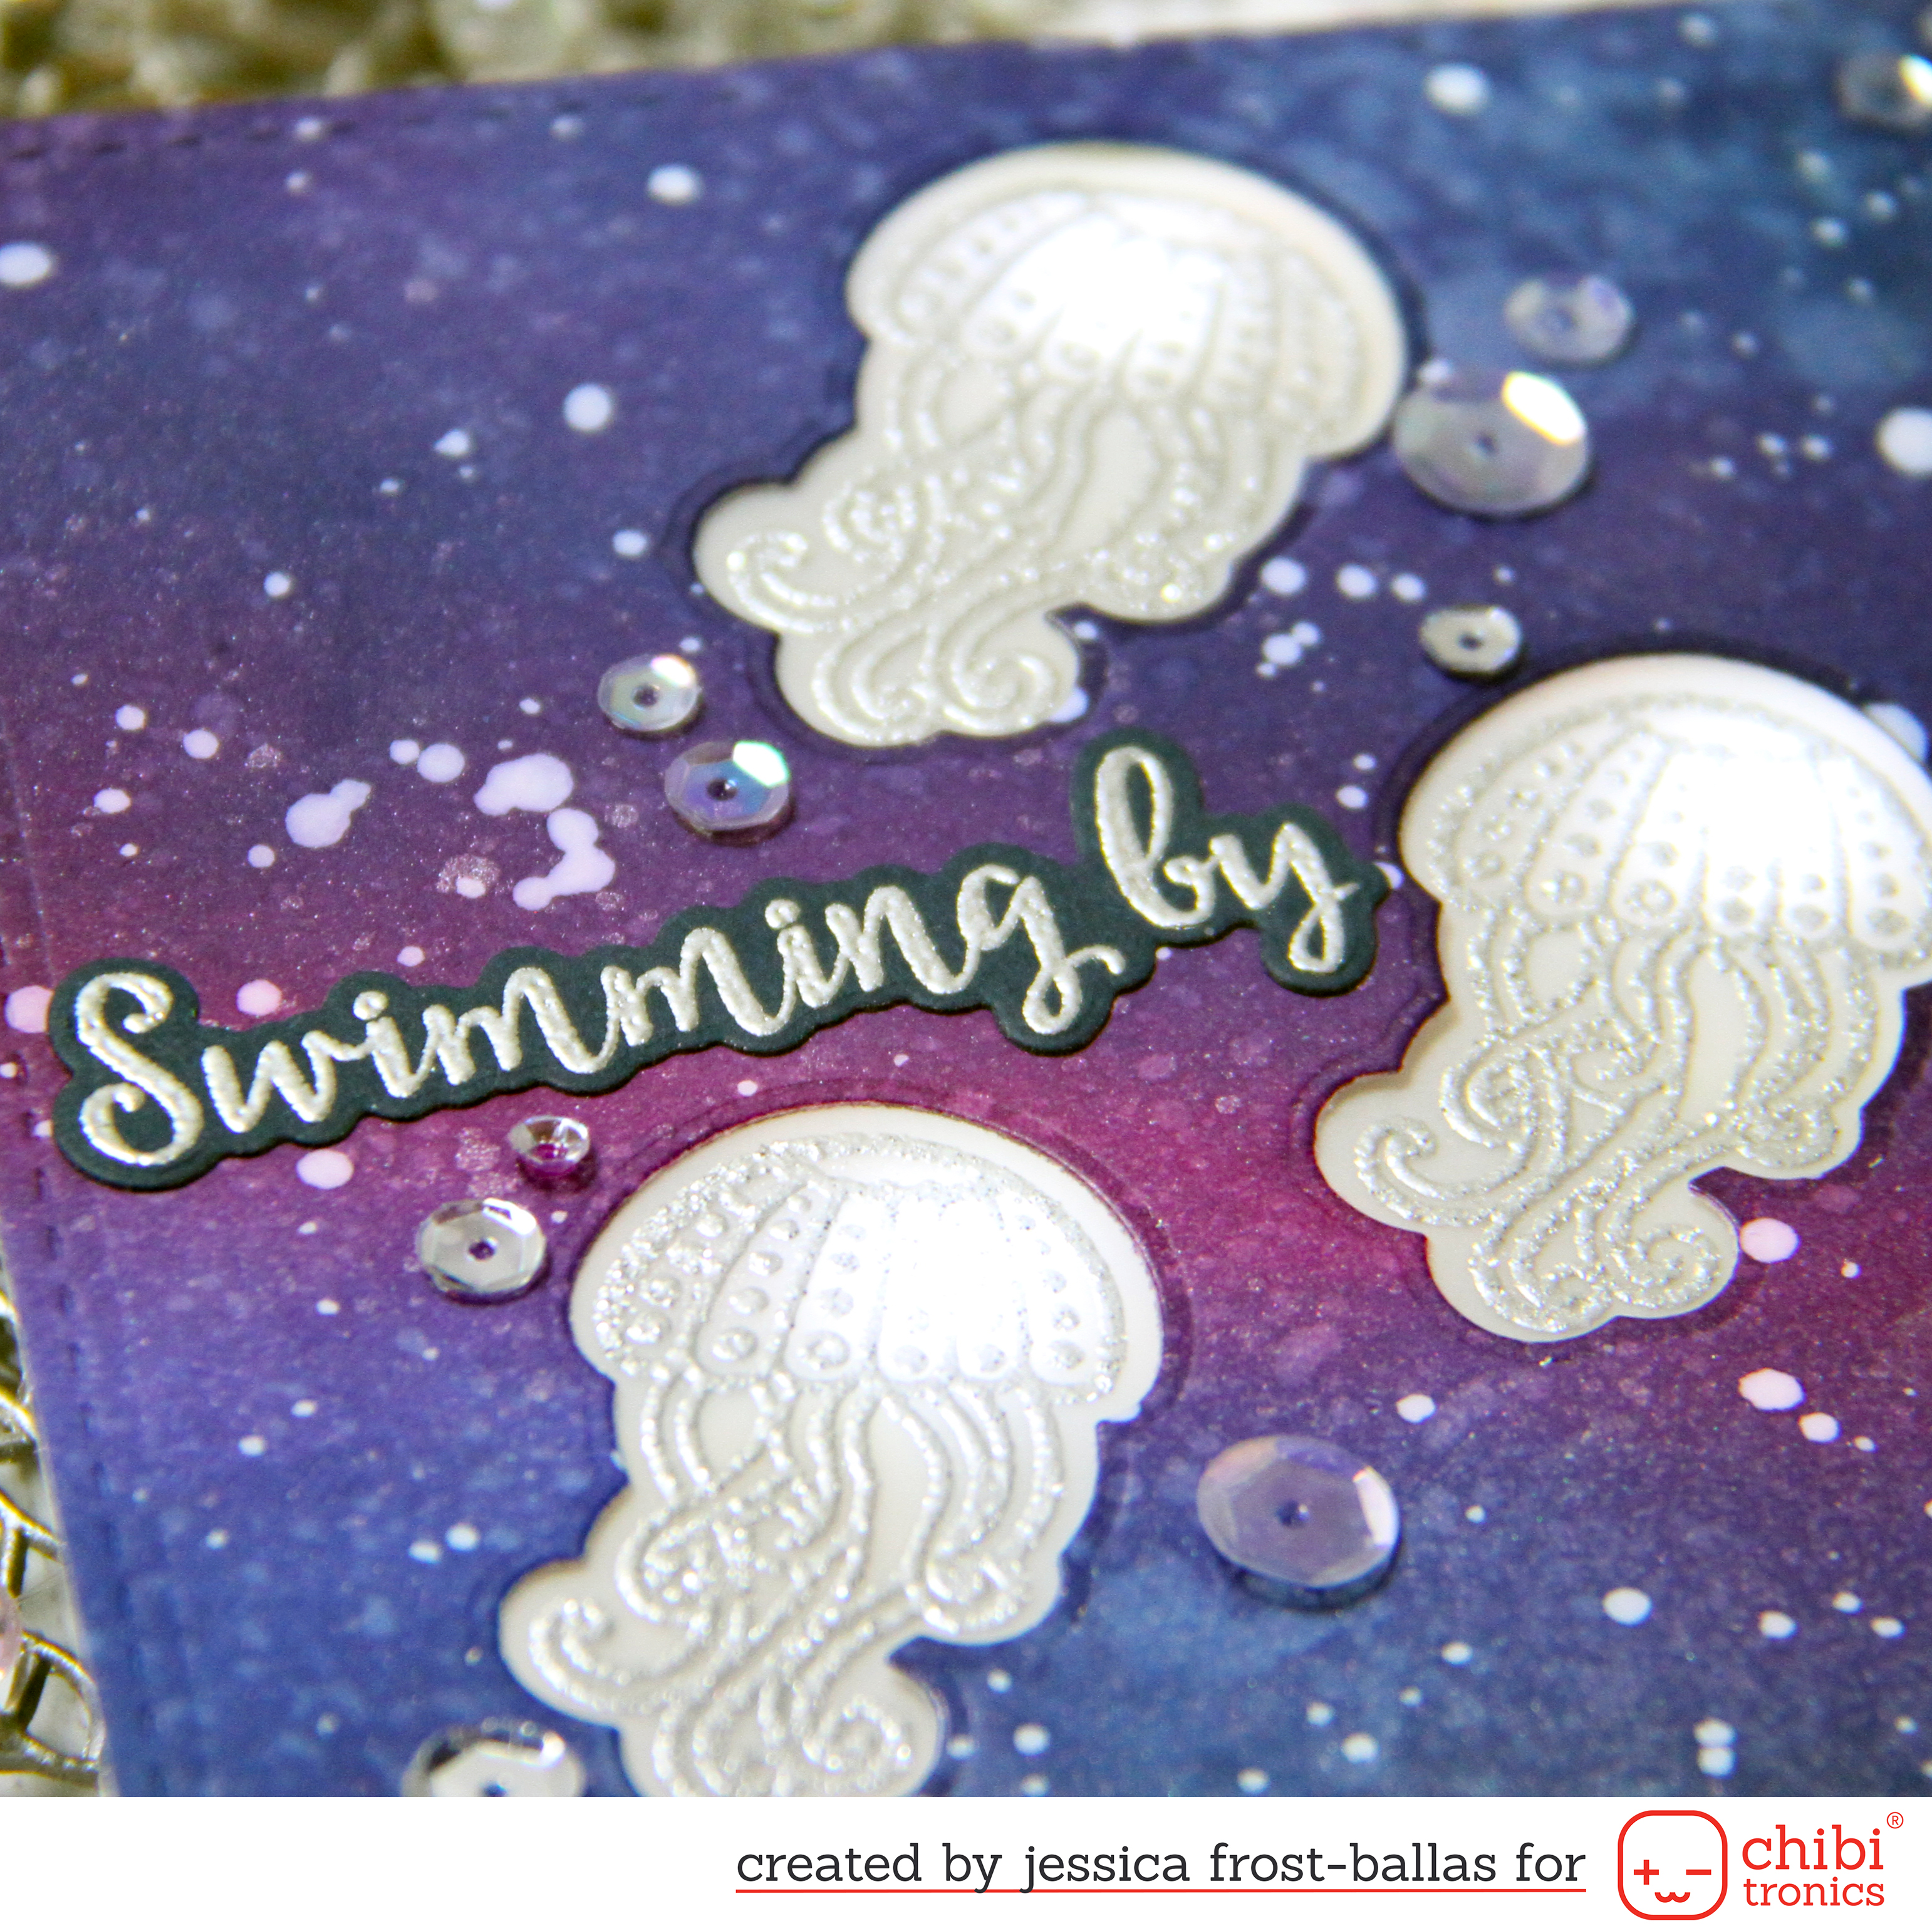 Swimming By to Say Hi by Jessica Frost-Ballas for Chibitronics